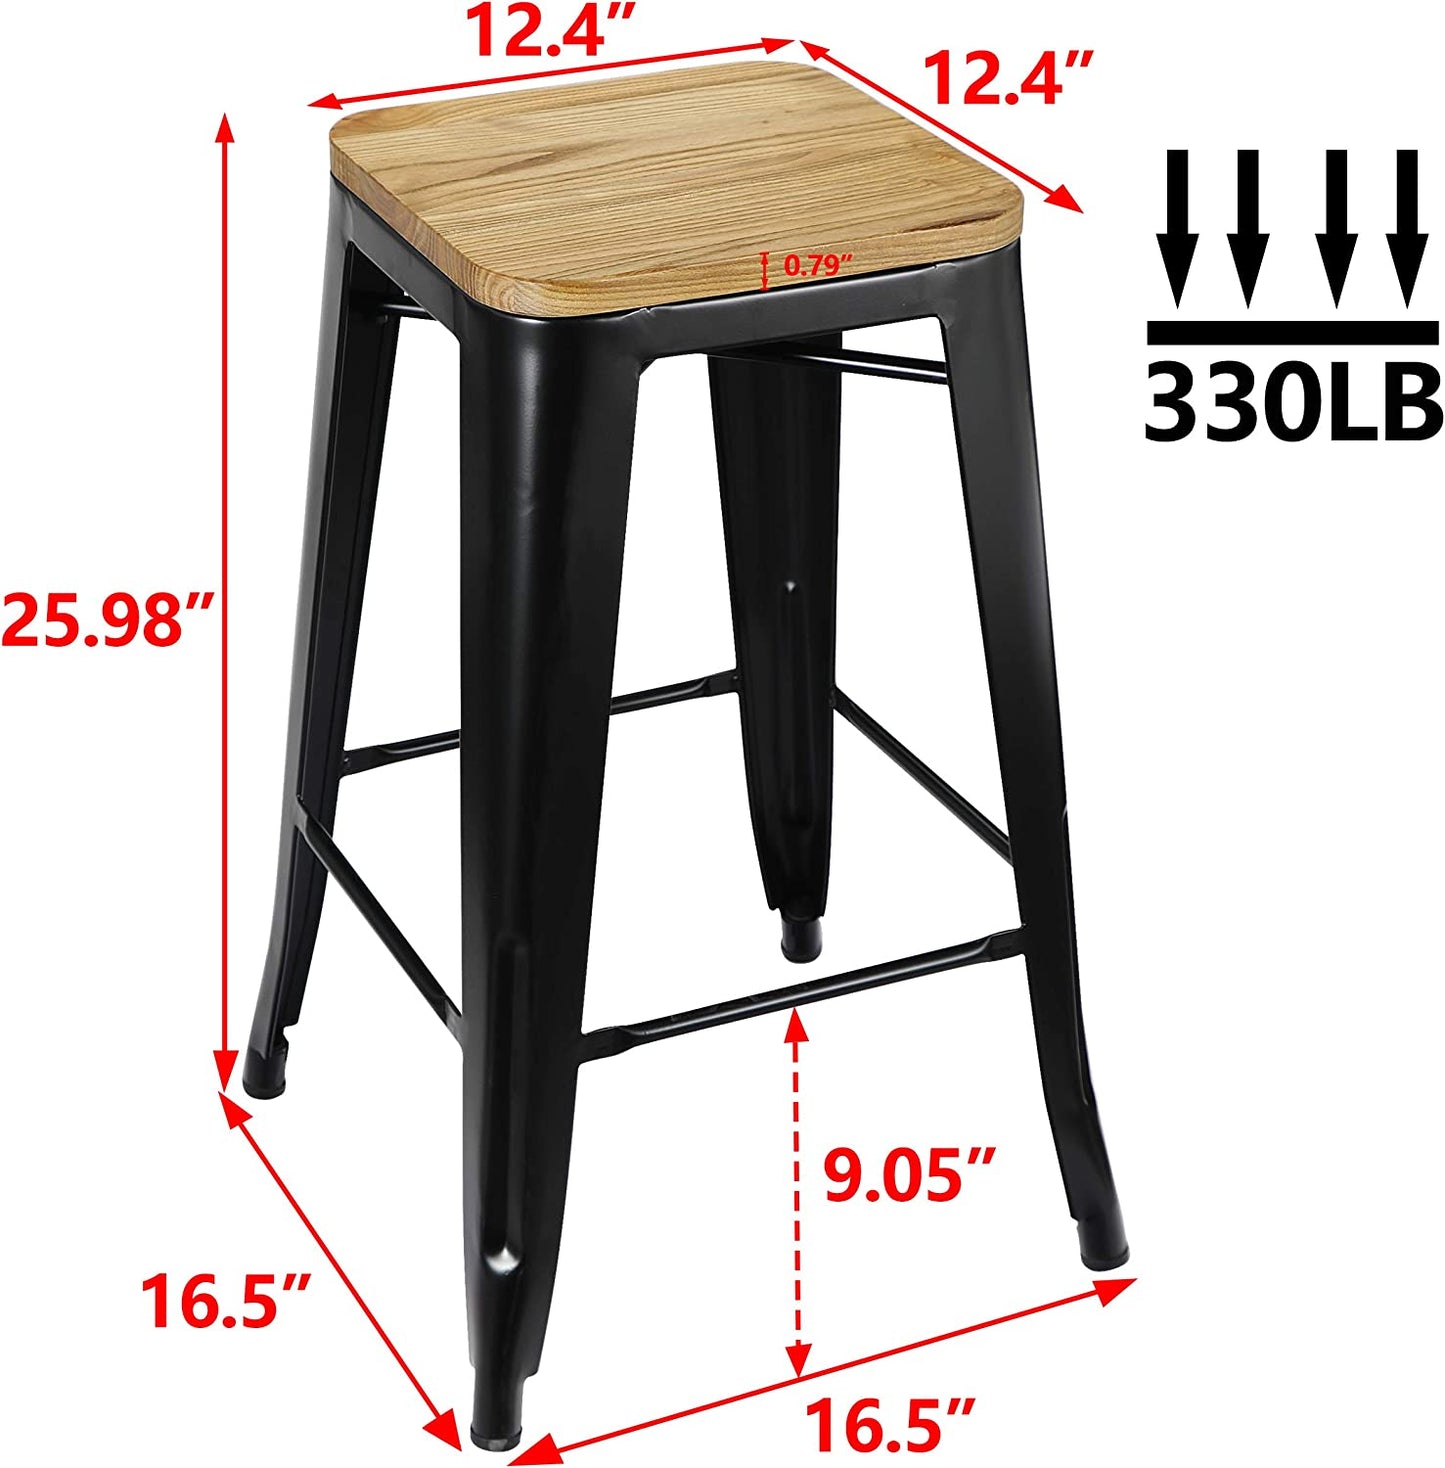 Set of 8 Metal Bar Stools 26" Counter Height with Wooden Seat Stackable Indoor/Outdoor Barstools, 330 lbs Capacity